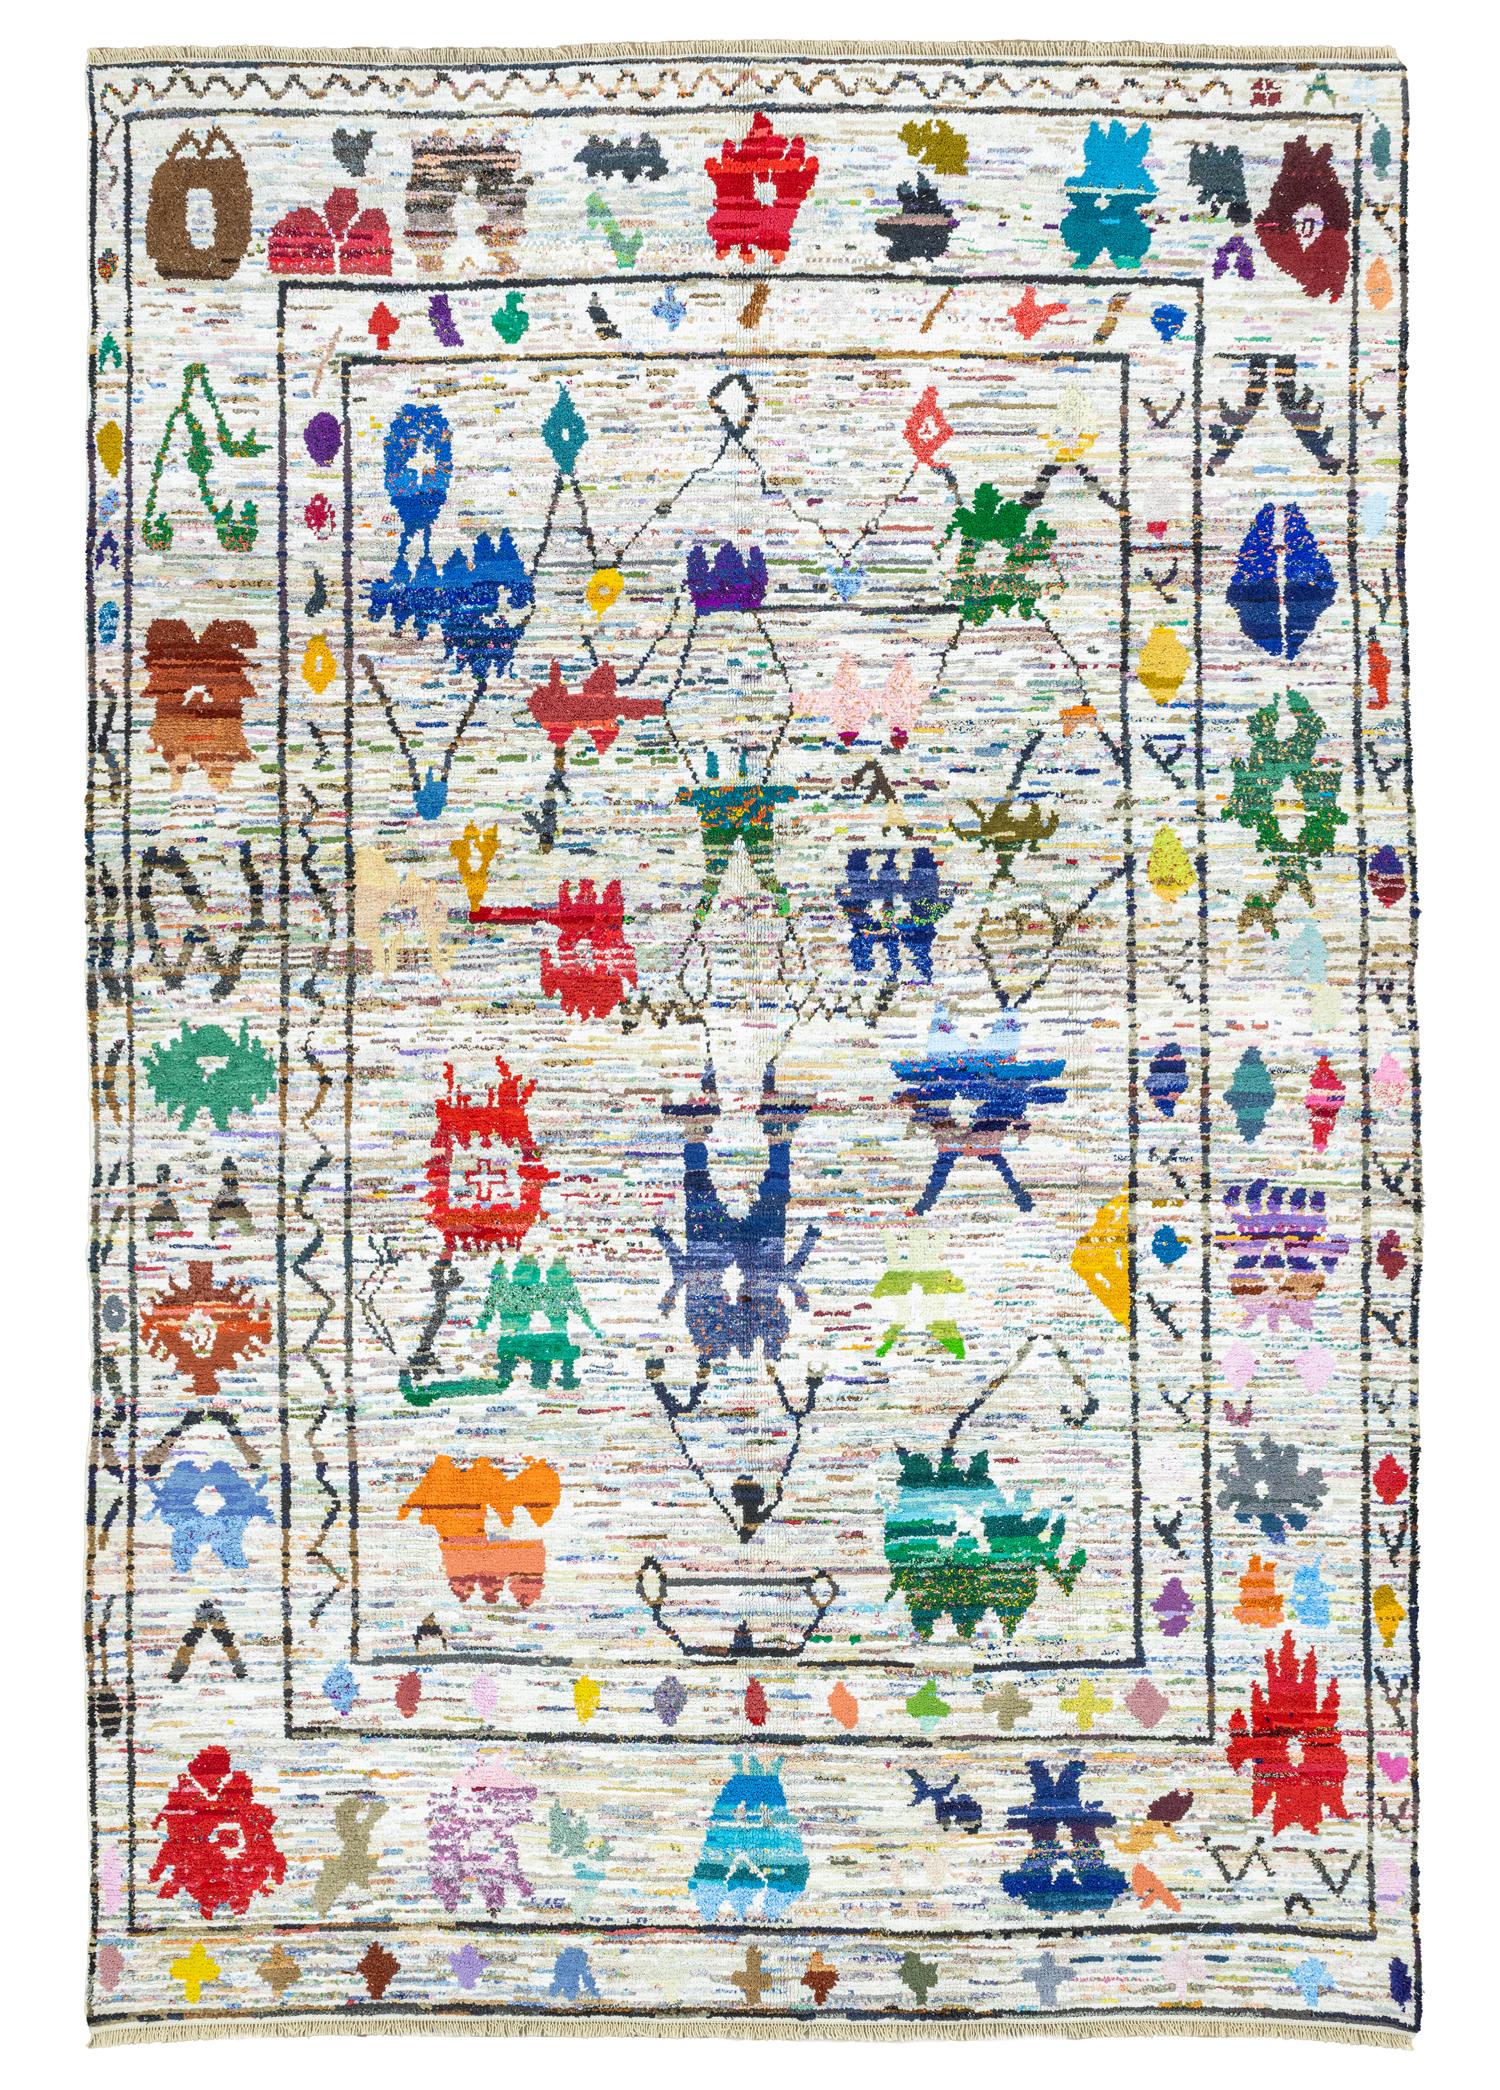 Timer Primitive Figured Colorful Hand-Woven Rug 273x403 cm